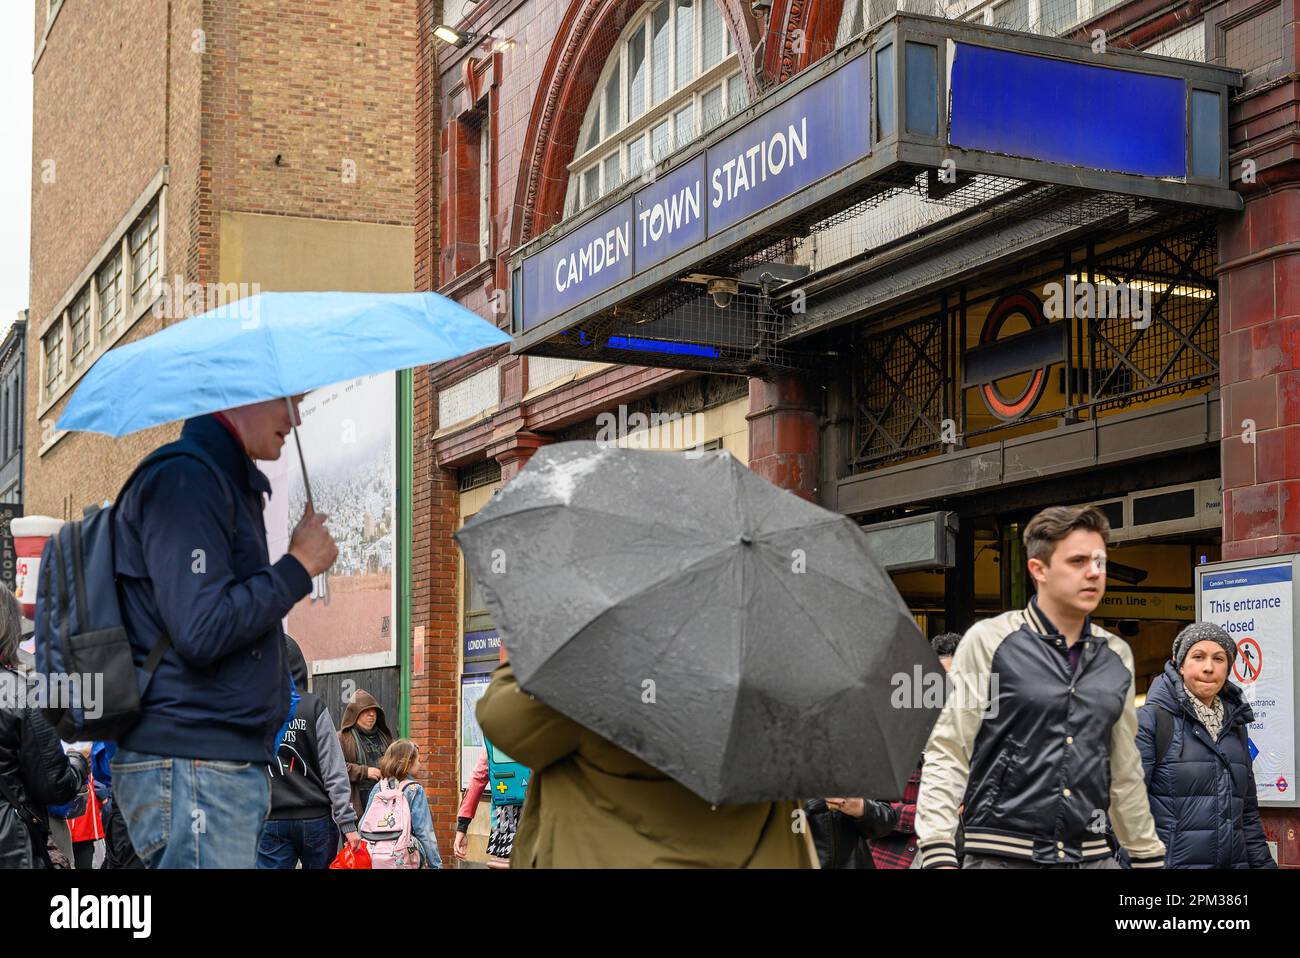 Camden Town, London: Outside Camden Town tube station on Camden High Street. People standing by the underground station in the rain. Stock Photo